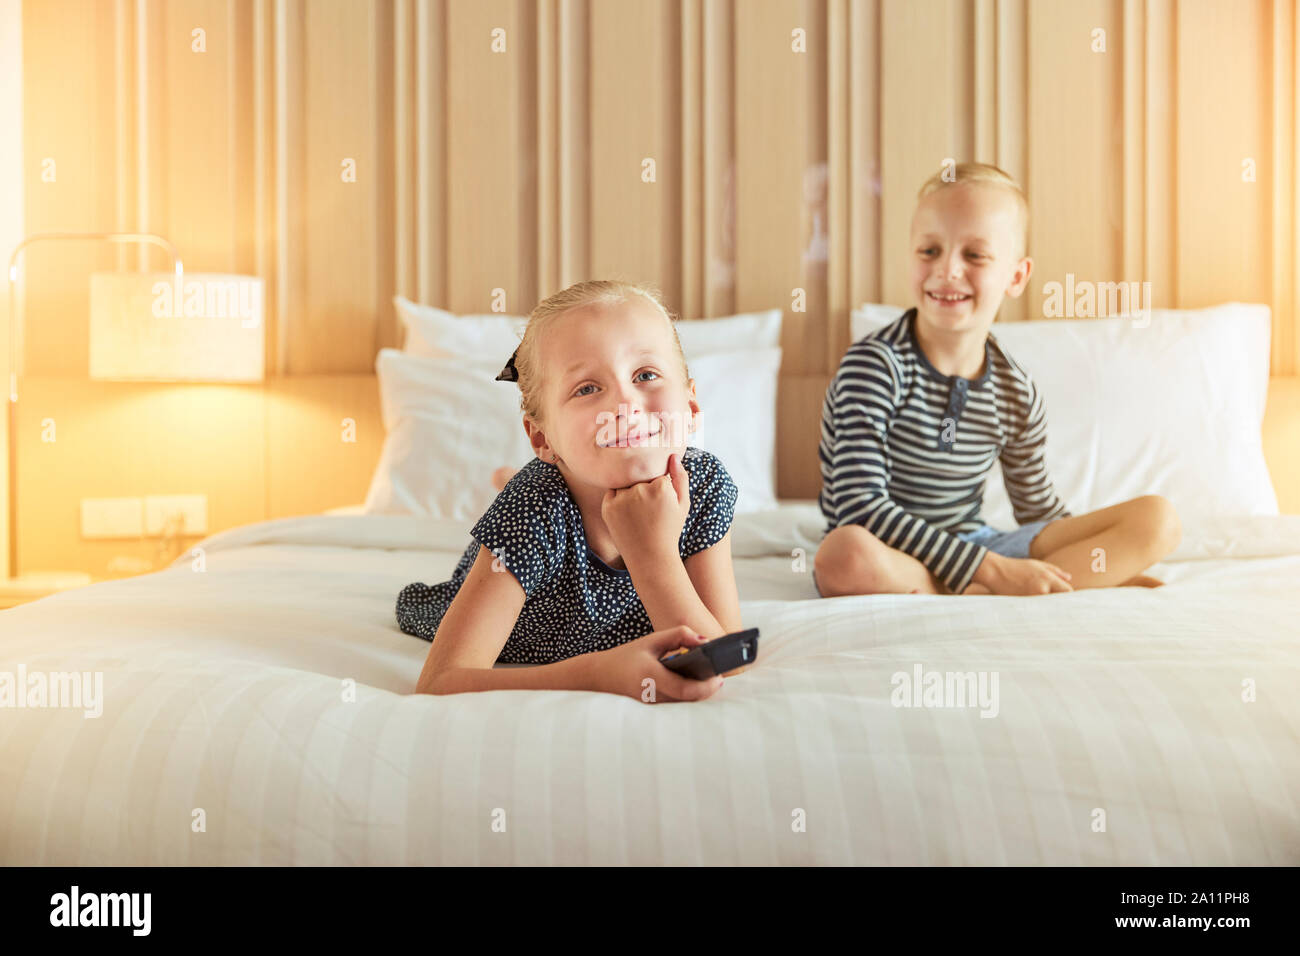 Smiling little girl lying on a bed changing channels while watching televeision with her brother Stock Photo